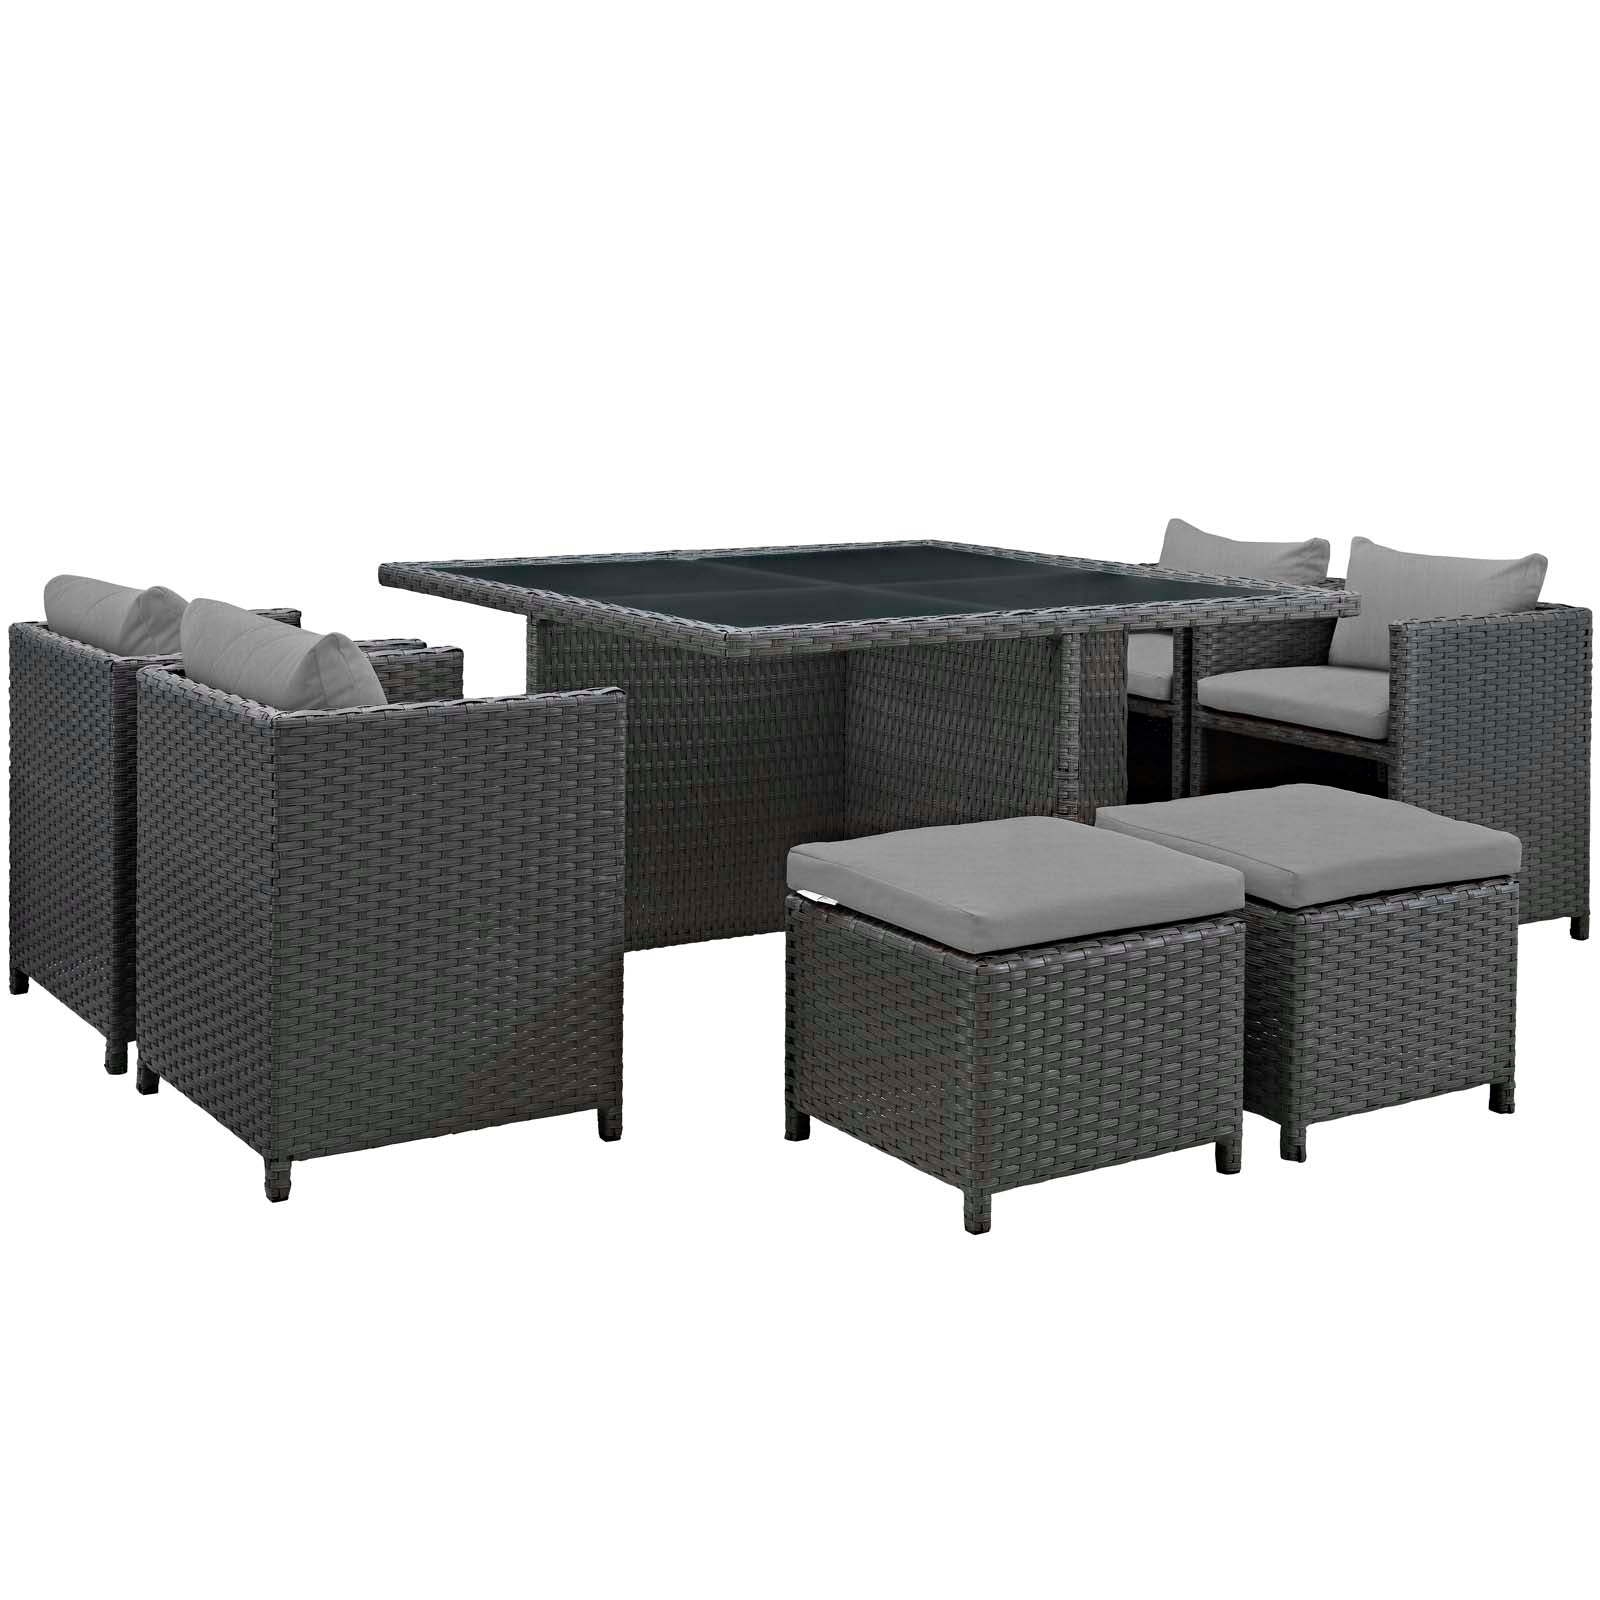 Sojourn 9 Piece Outdoor Patio Sunbrella® Dining Set - East Shore Modern Home Furnishings